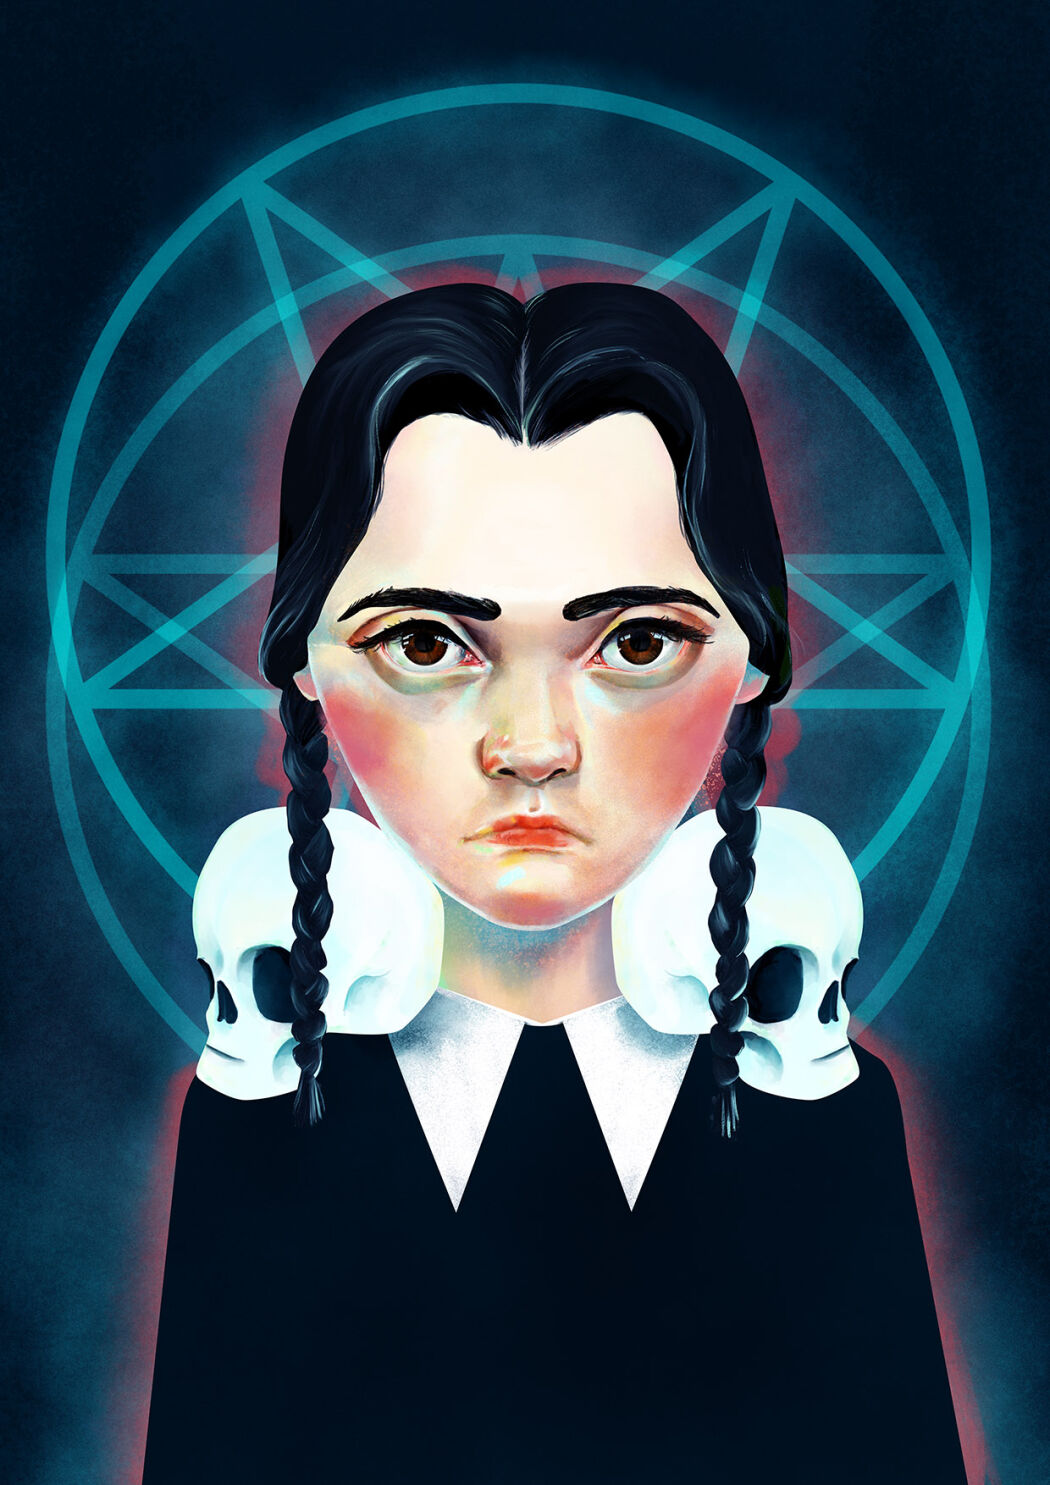 Illustrated portrait by Eplet, Addams family theme